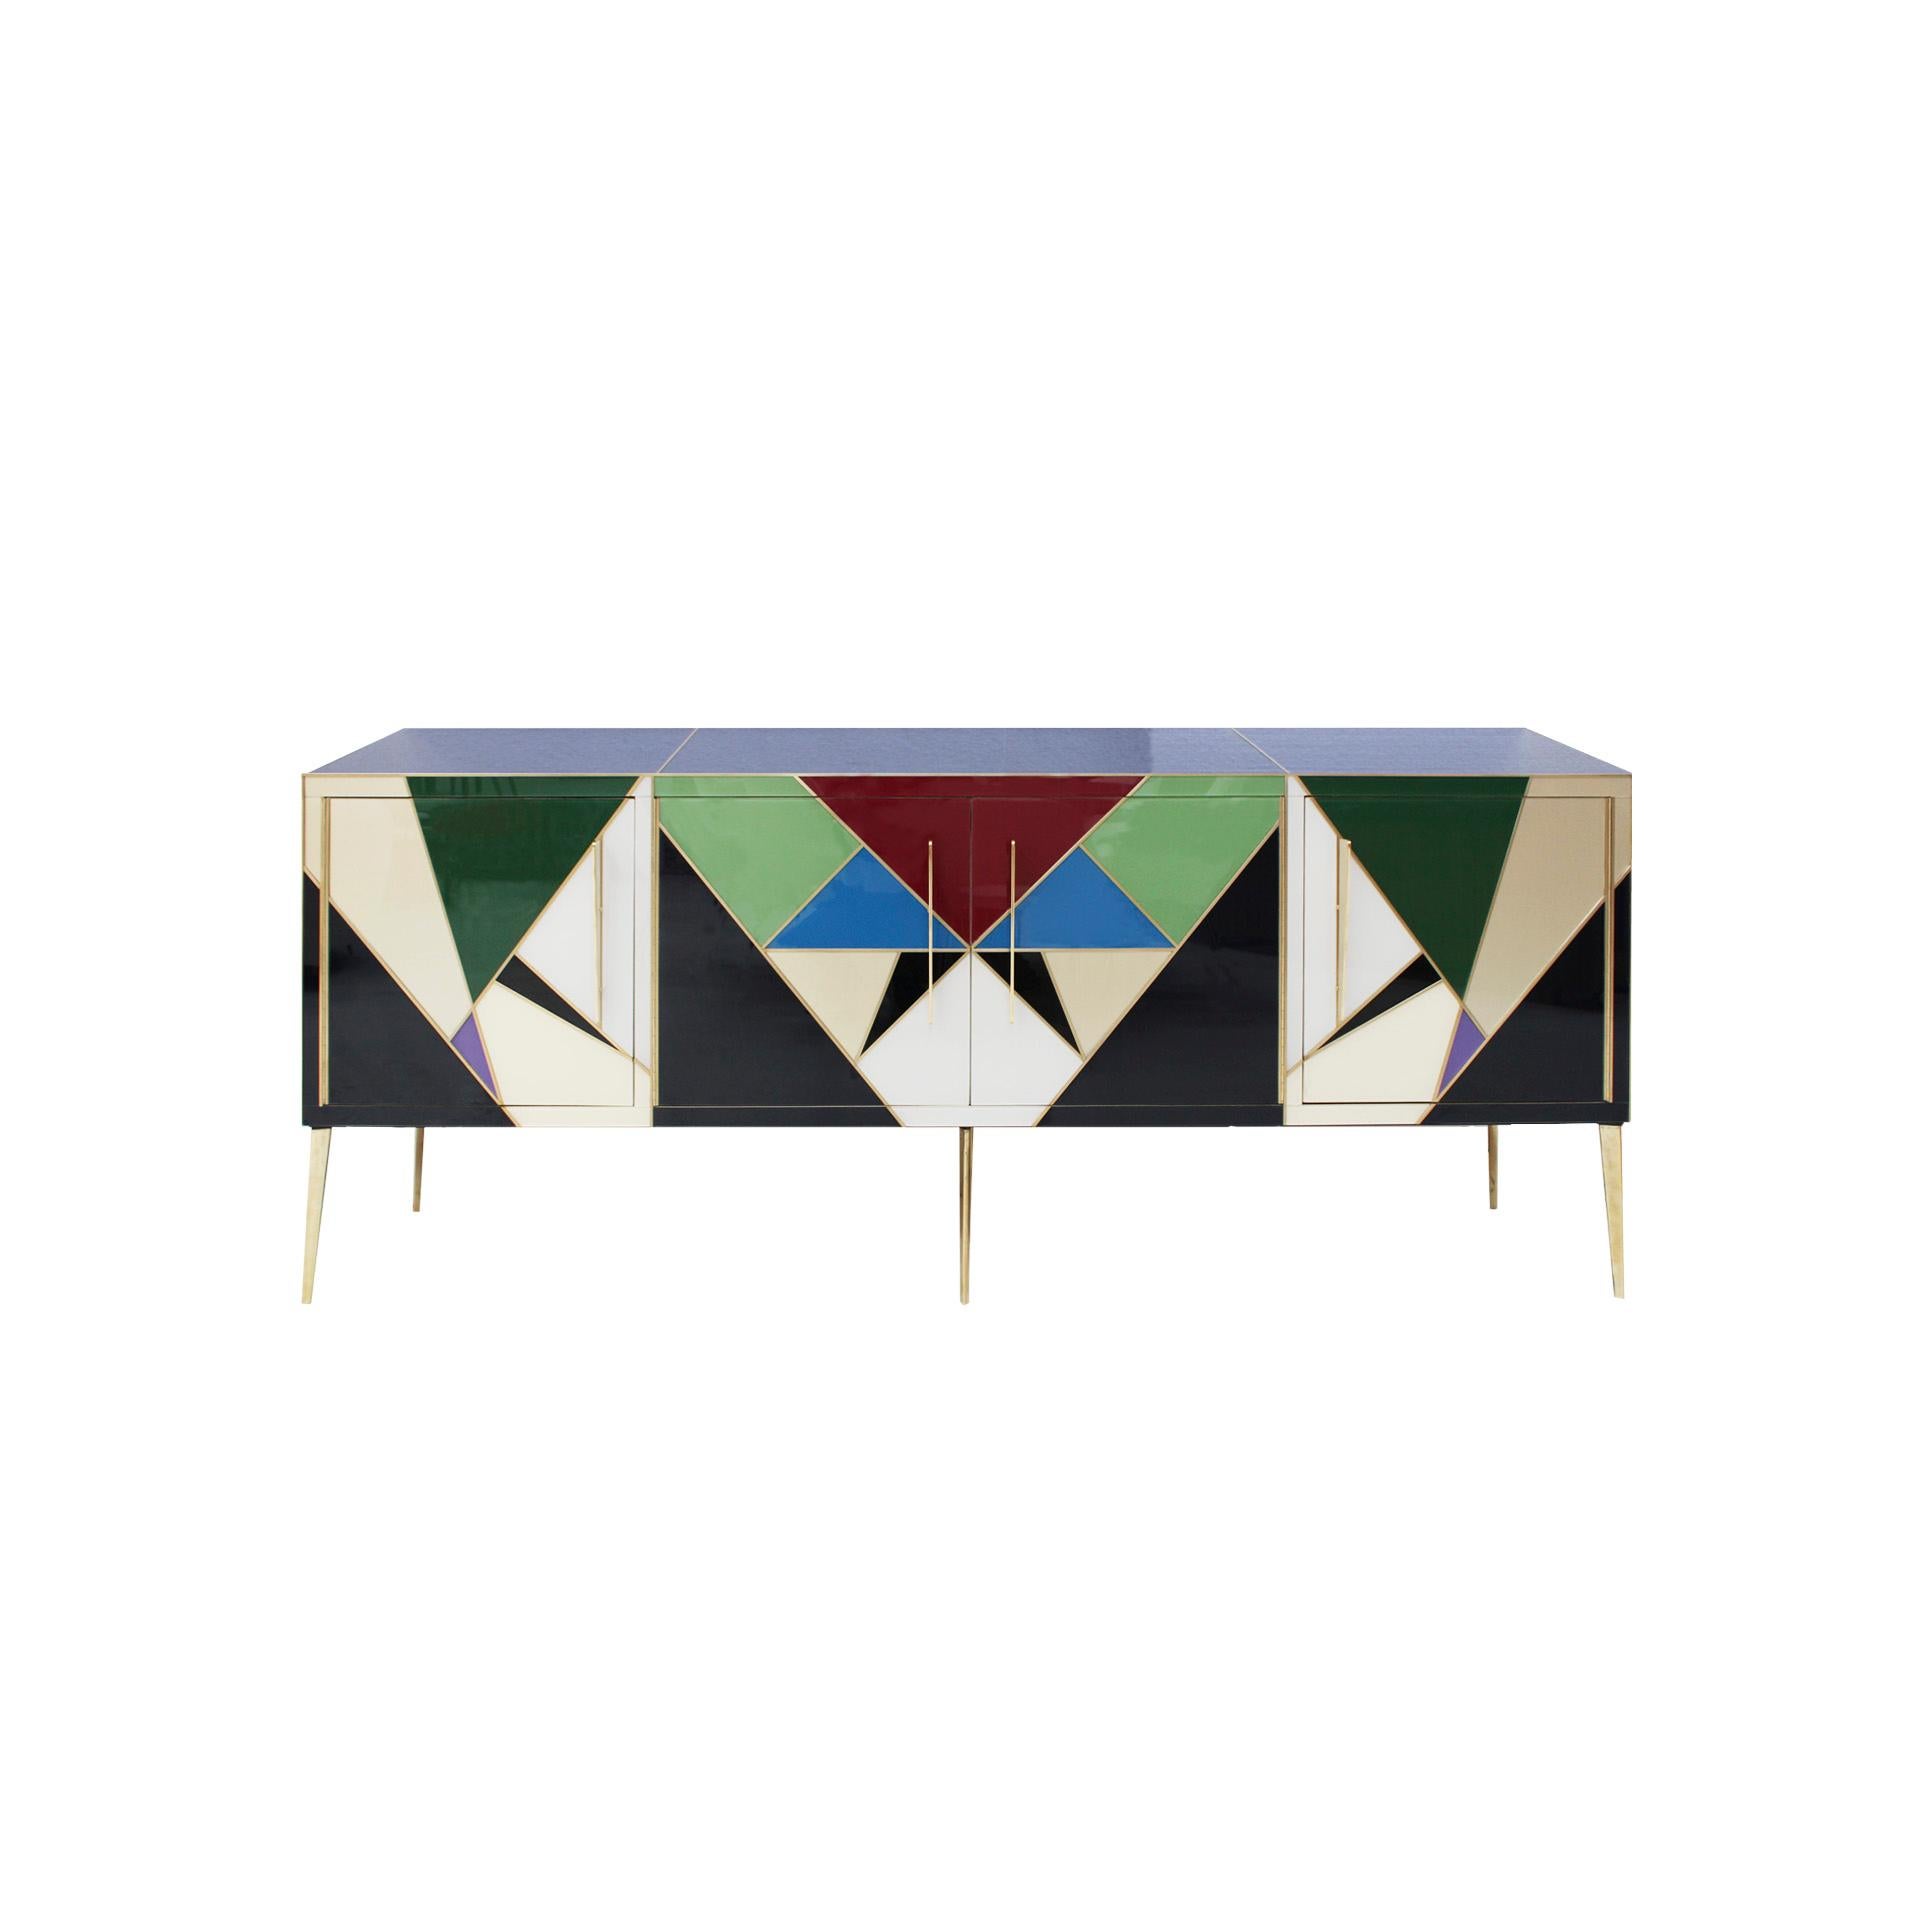 Sideboard with four folding doors made with an original solid wood structure from the 50s, covered in colored glass and brass profiles, handles and legs. Italian manufacture.